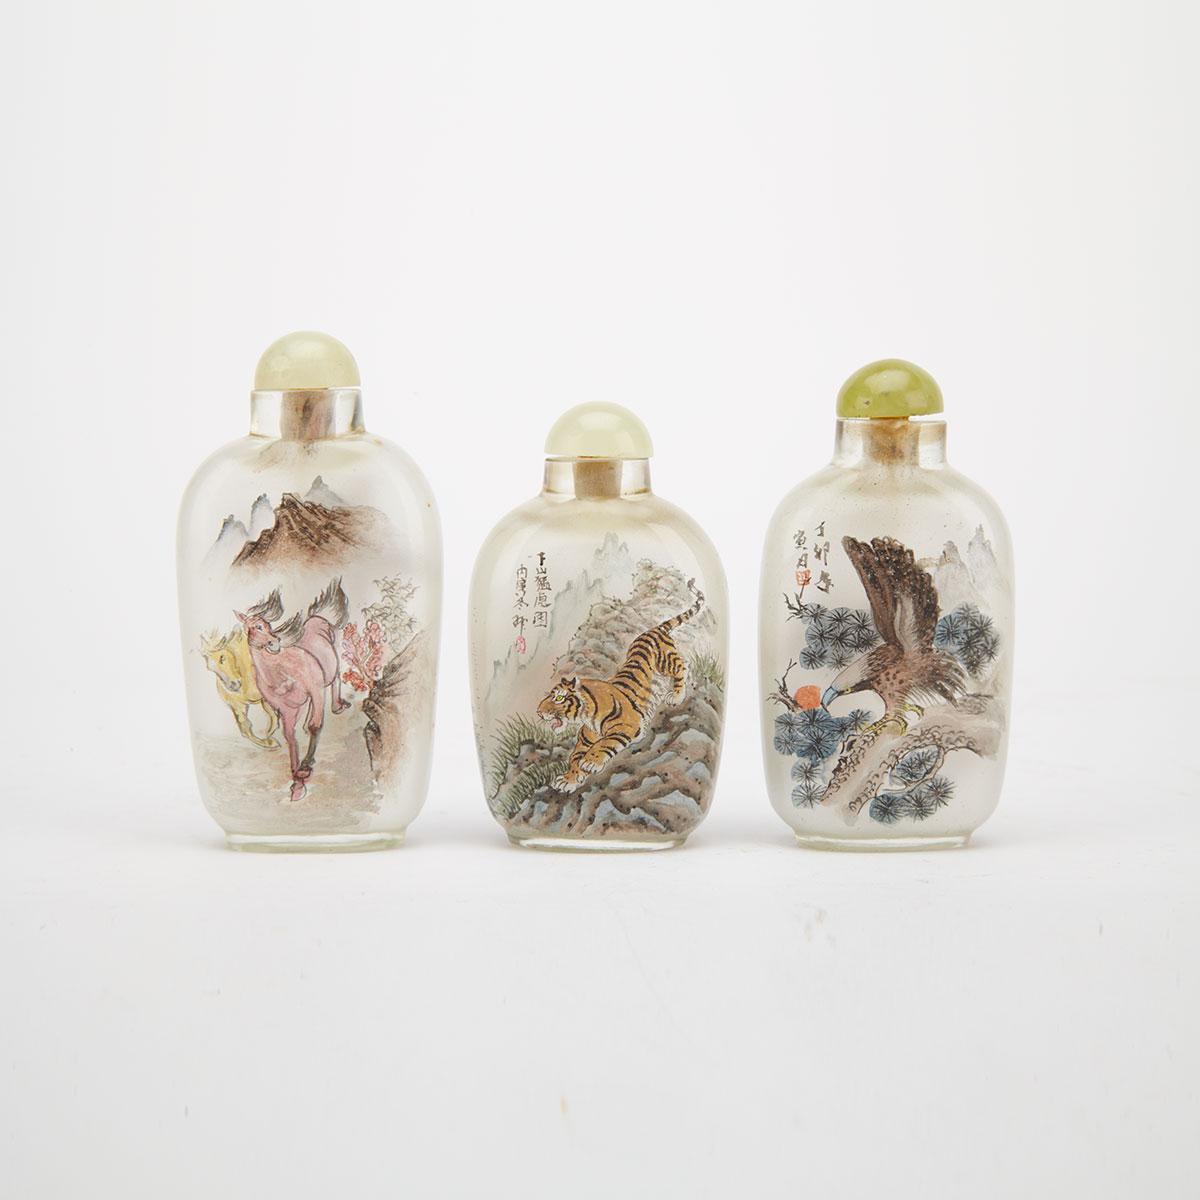 Three Interior Painted Glass Snuff Bottles, Early 20th Century